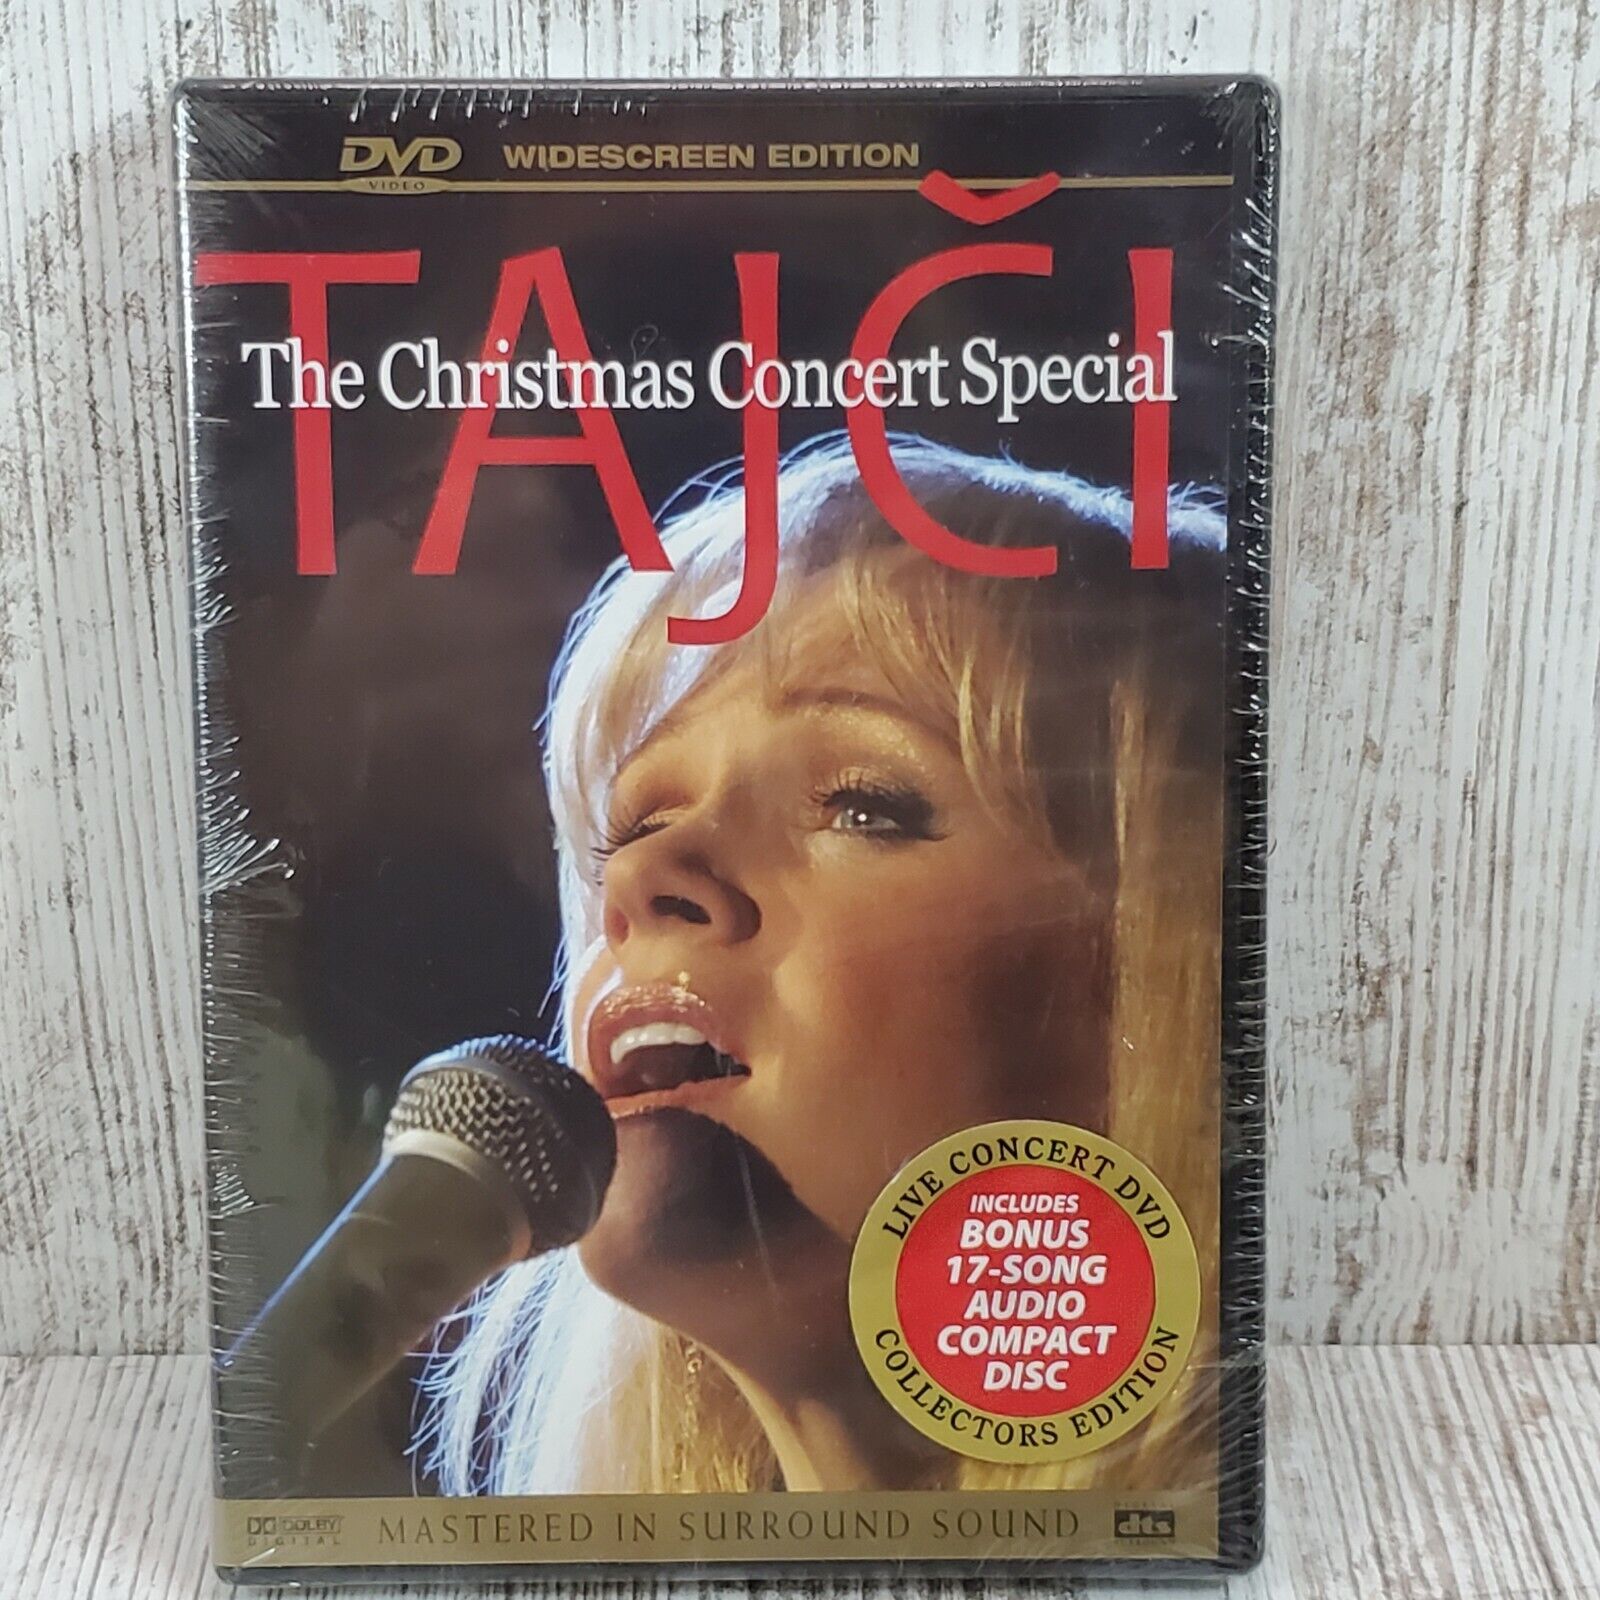 Tajci: The Christmas Concert Special Live Bonus 17 song Audio CD New Sealed